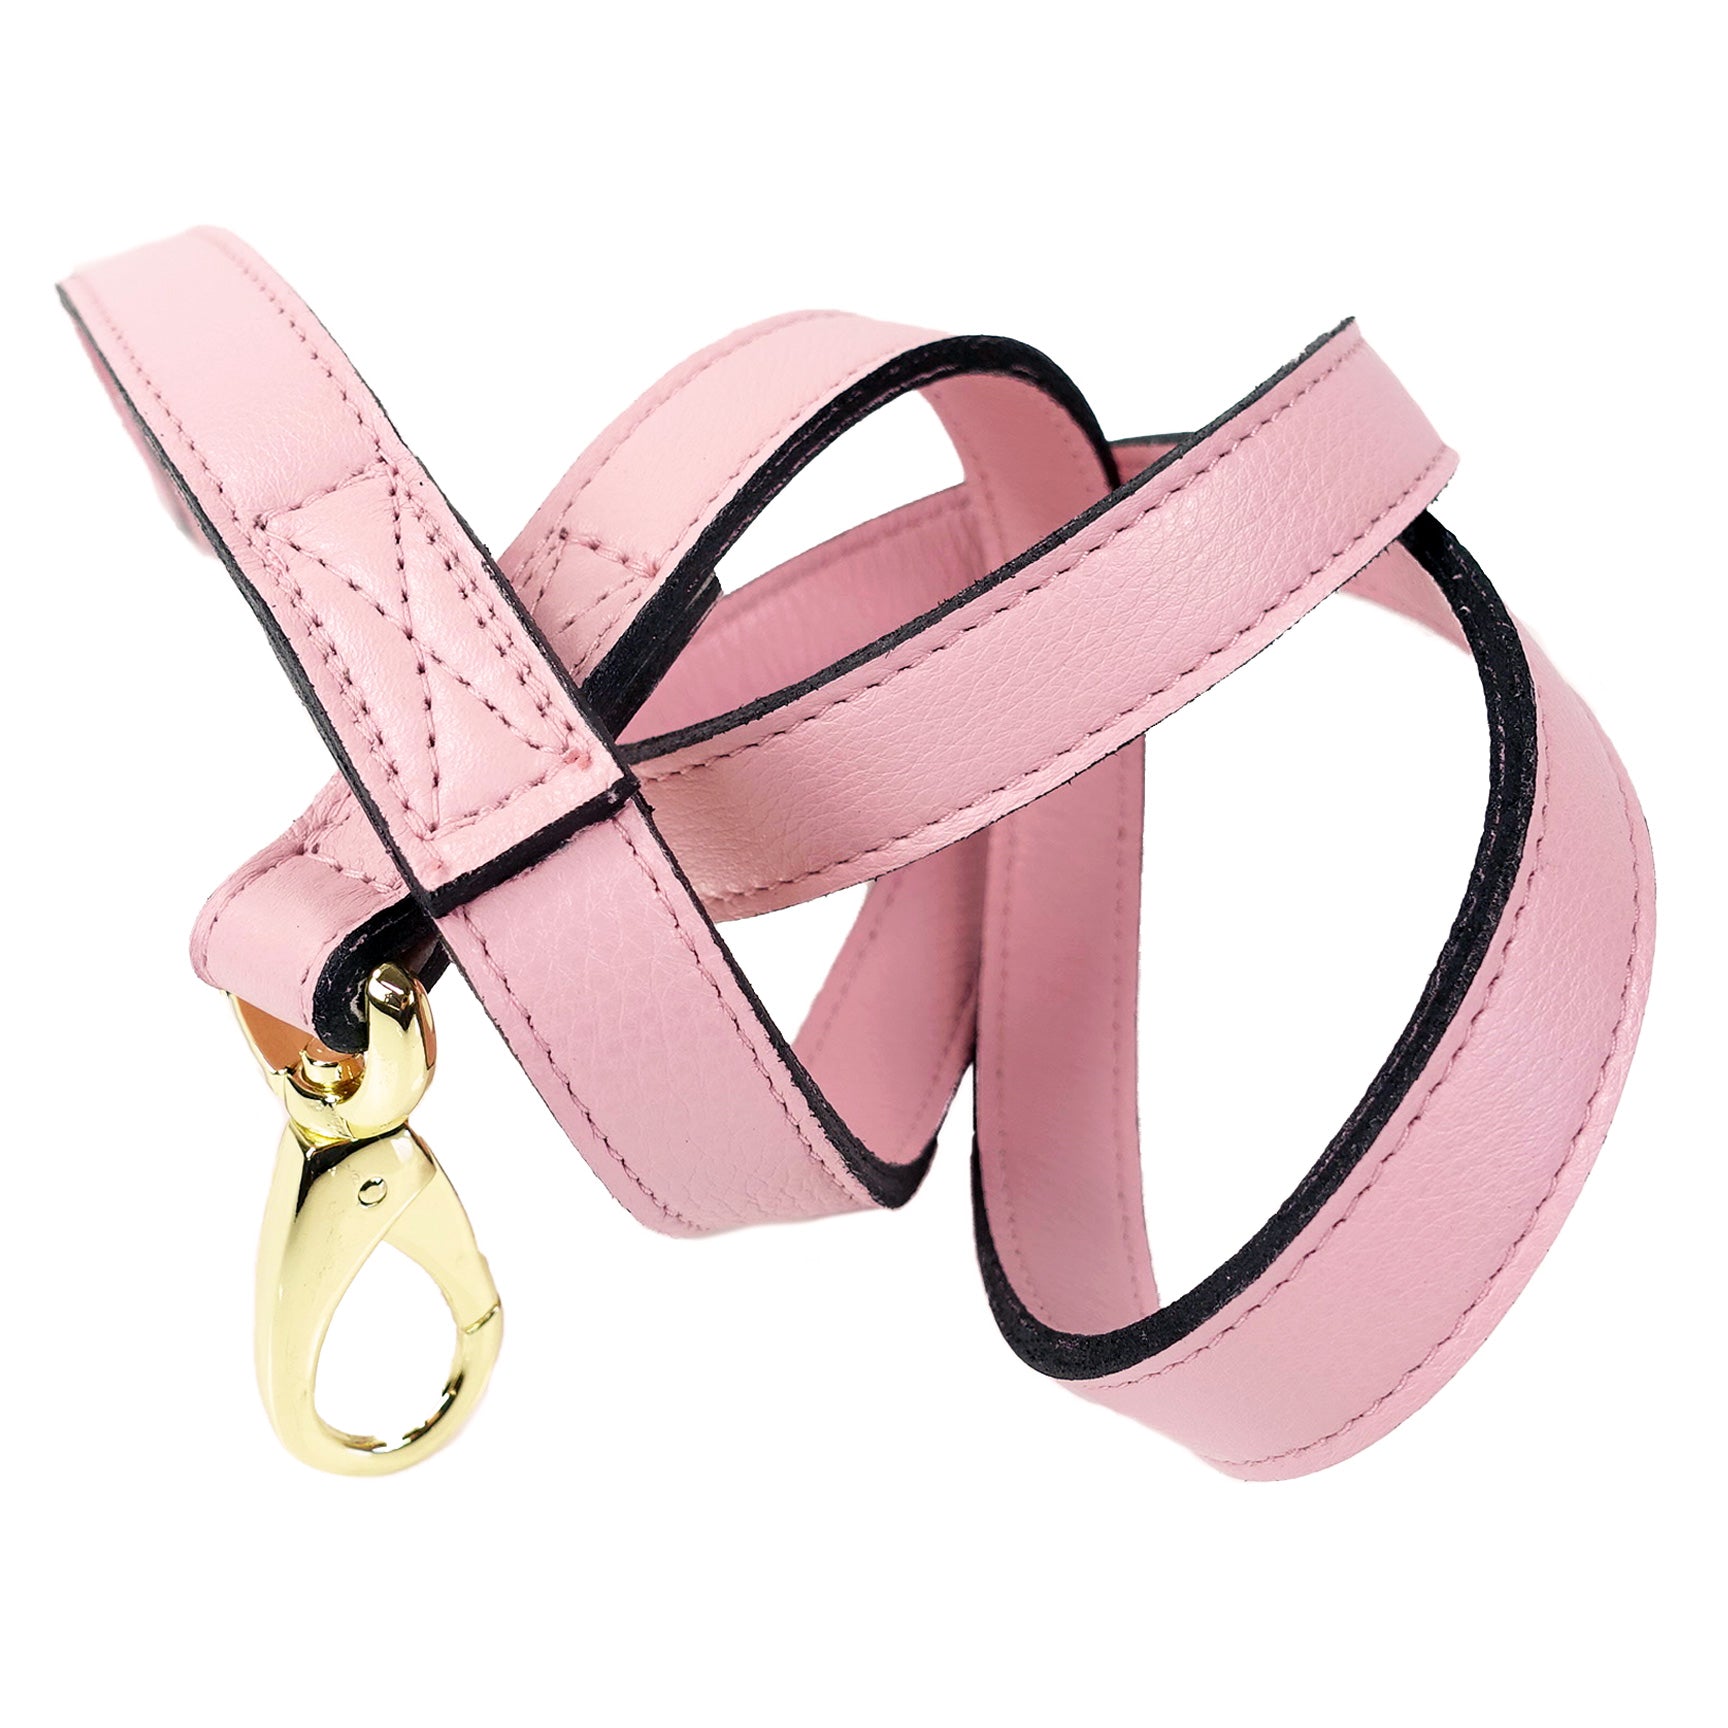 Royal Dog Leash in Sweet Pink & Gold